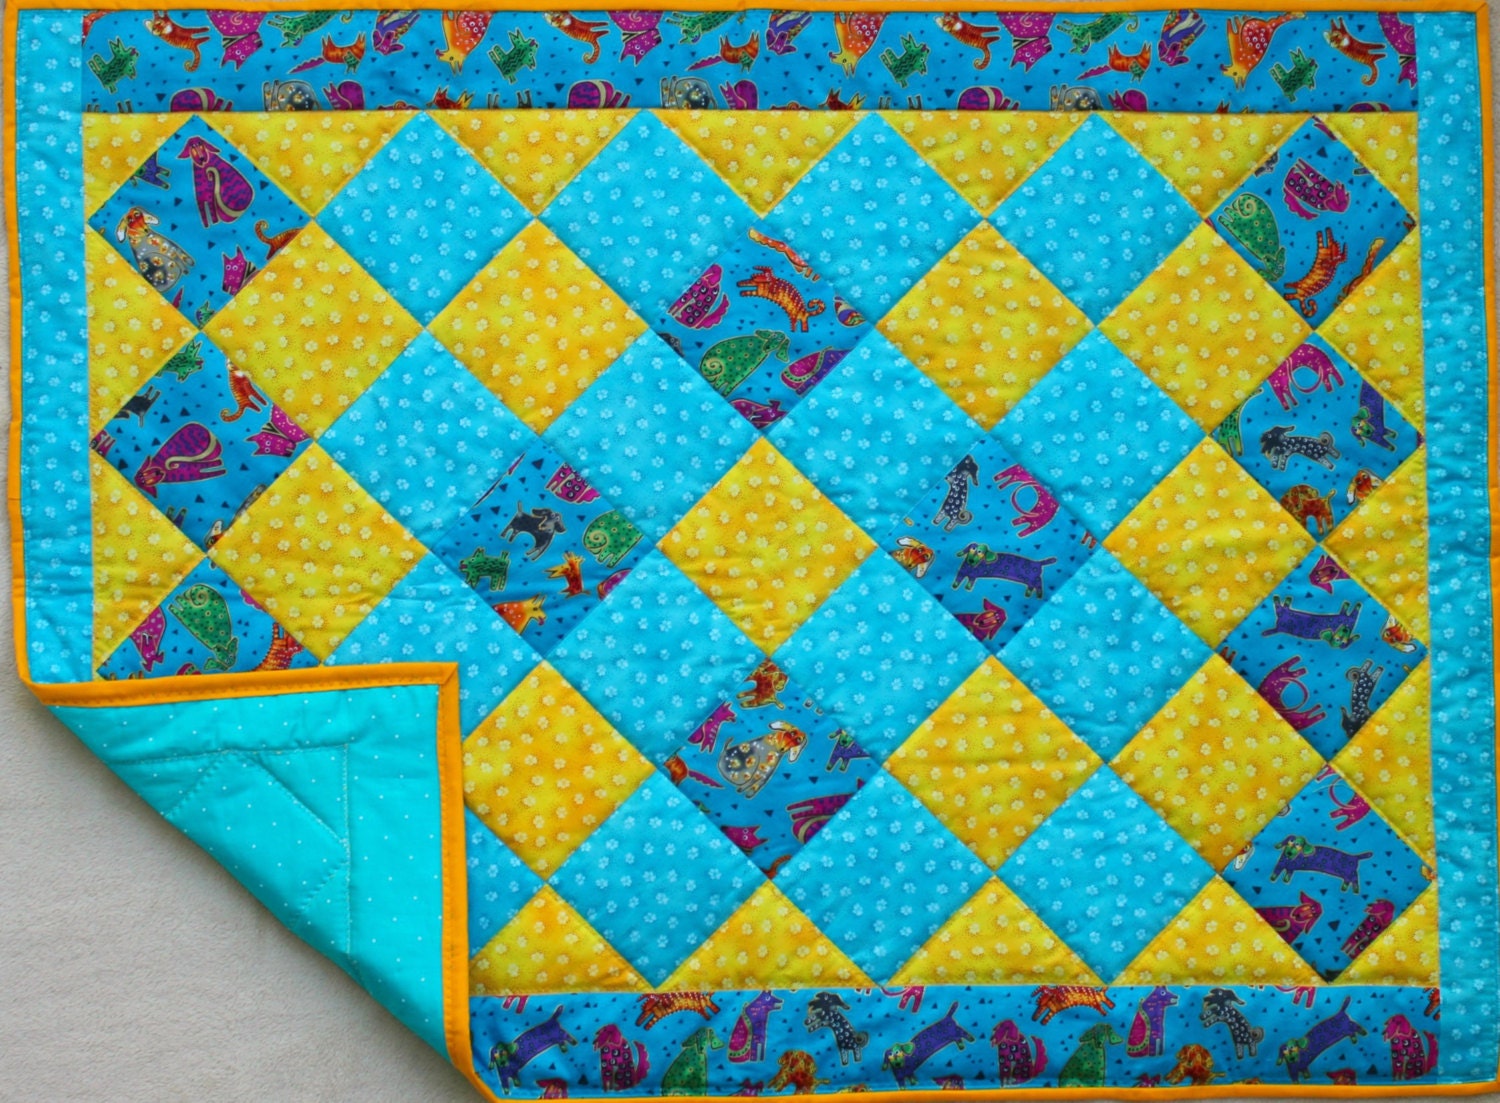 Crochet and fabric quilt – The Green Dragonfly